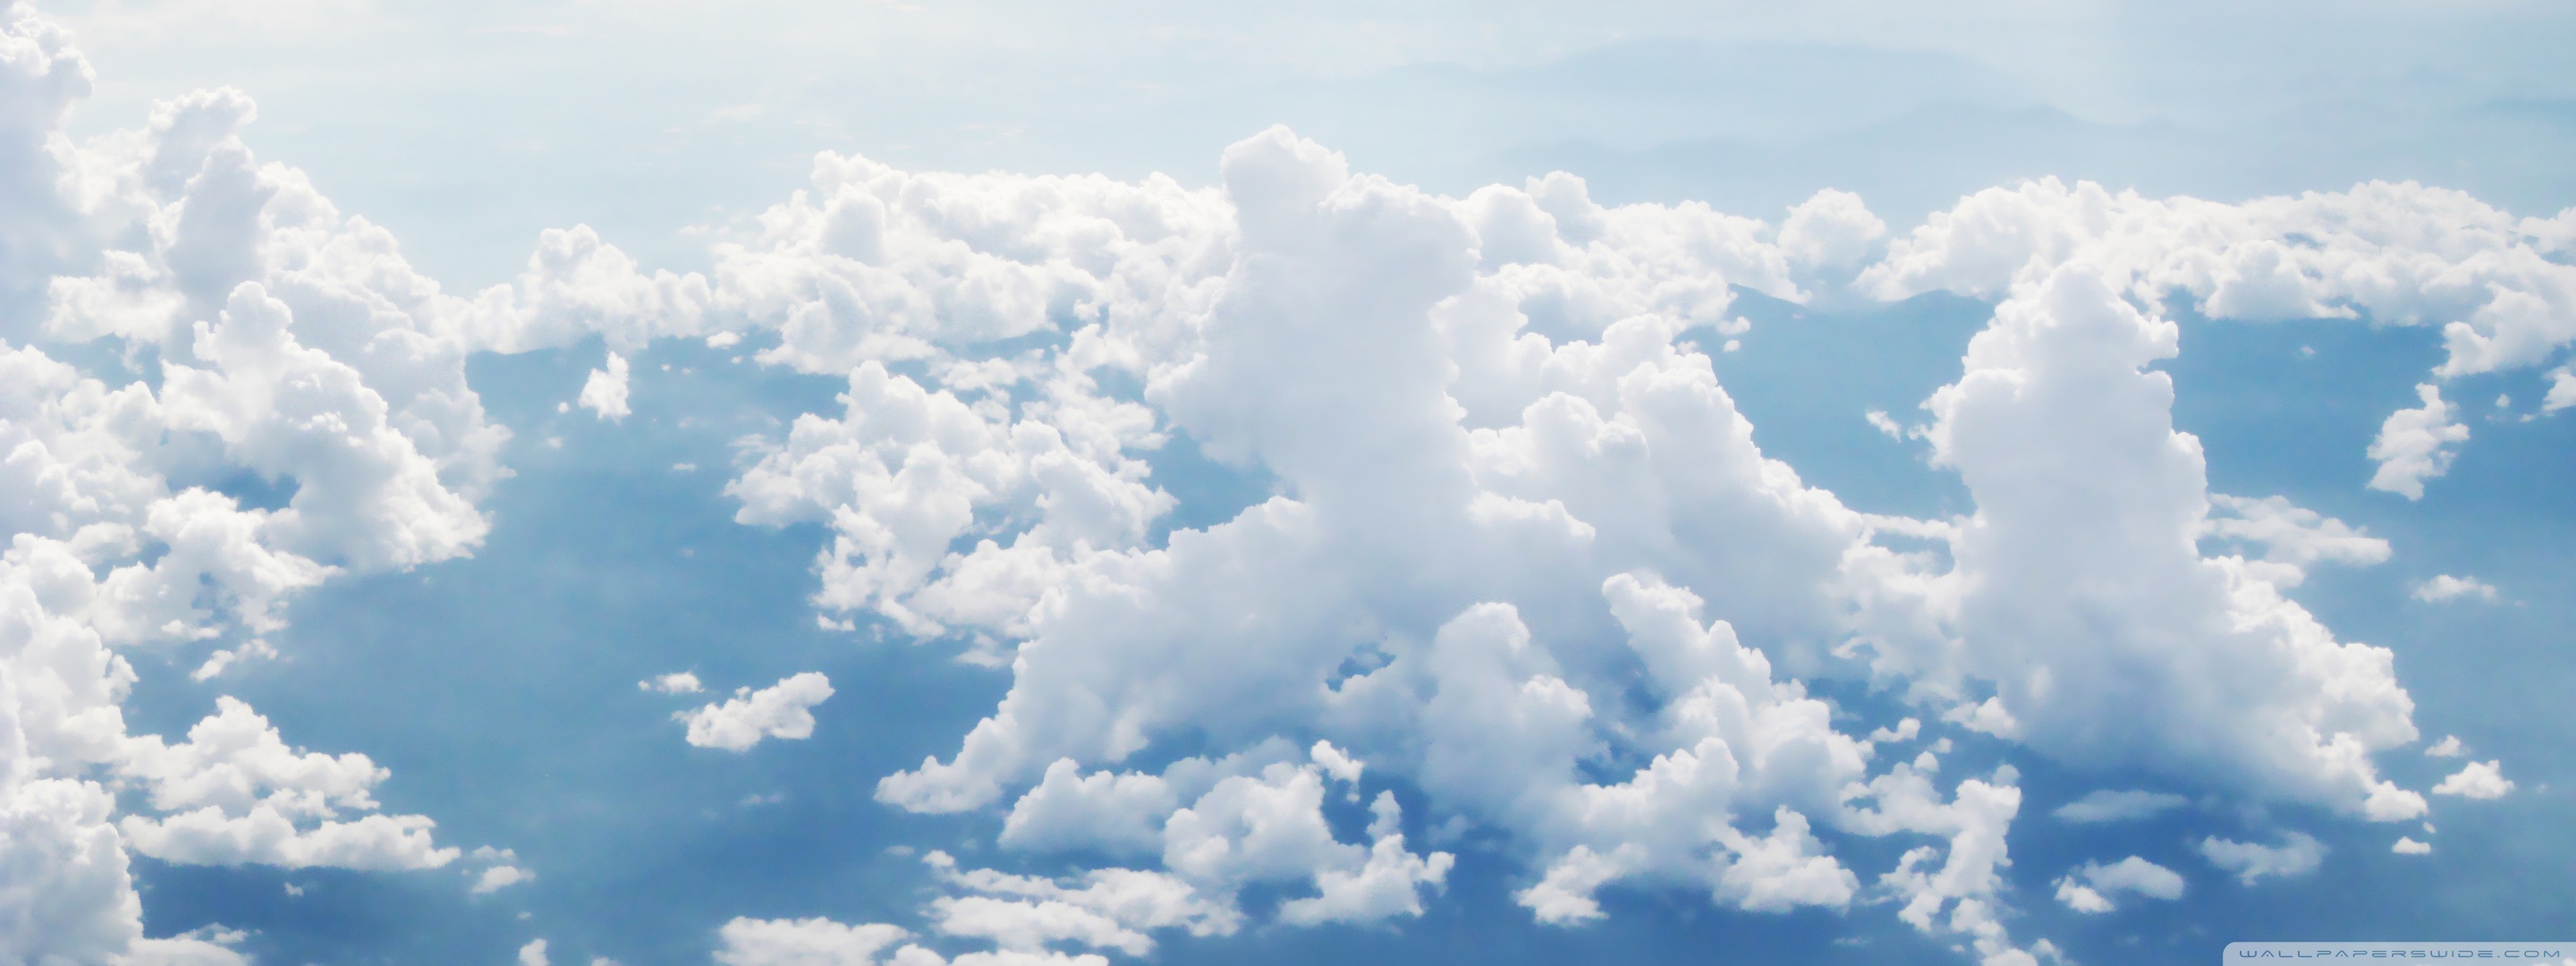 Sky And Clouds Aerial Photography Ultra HD Desktop Background Wallpaper